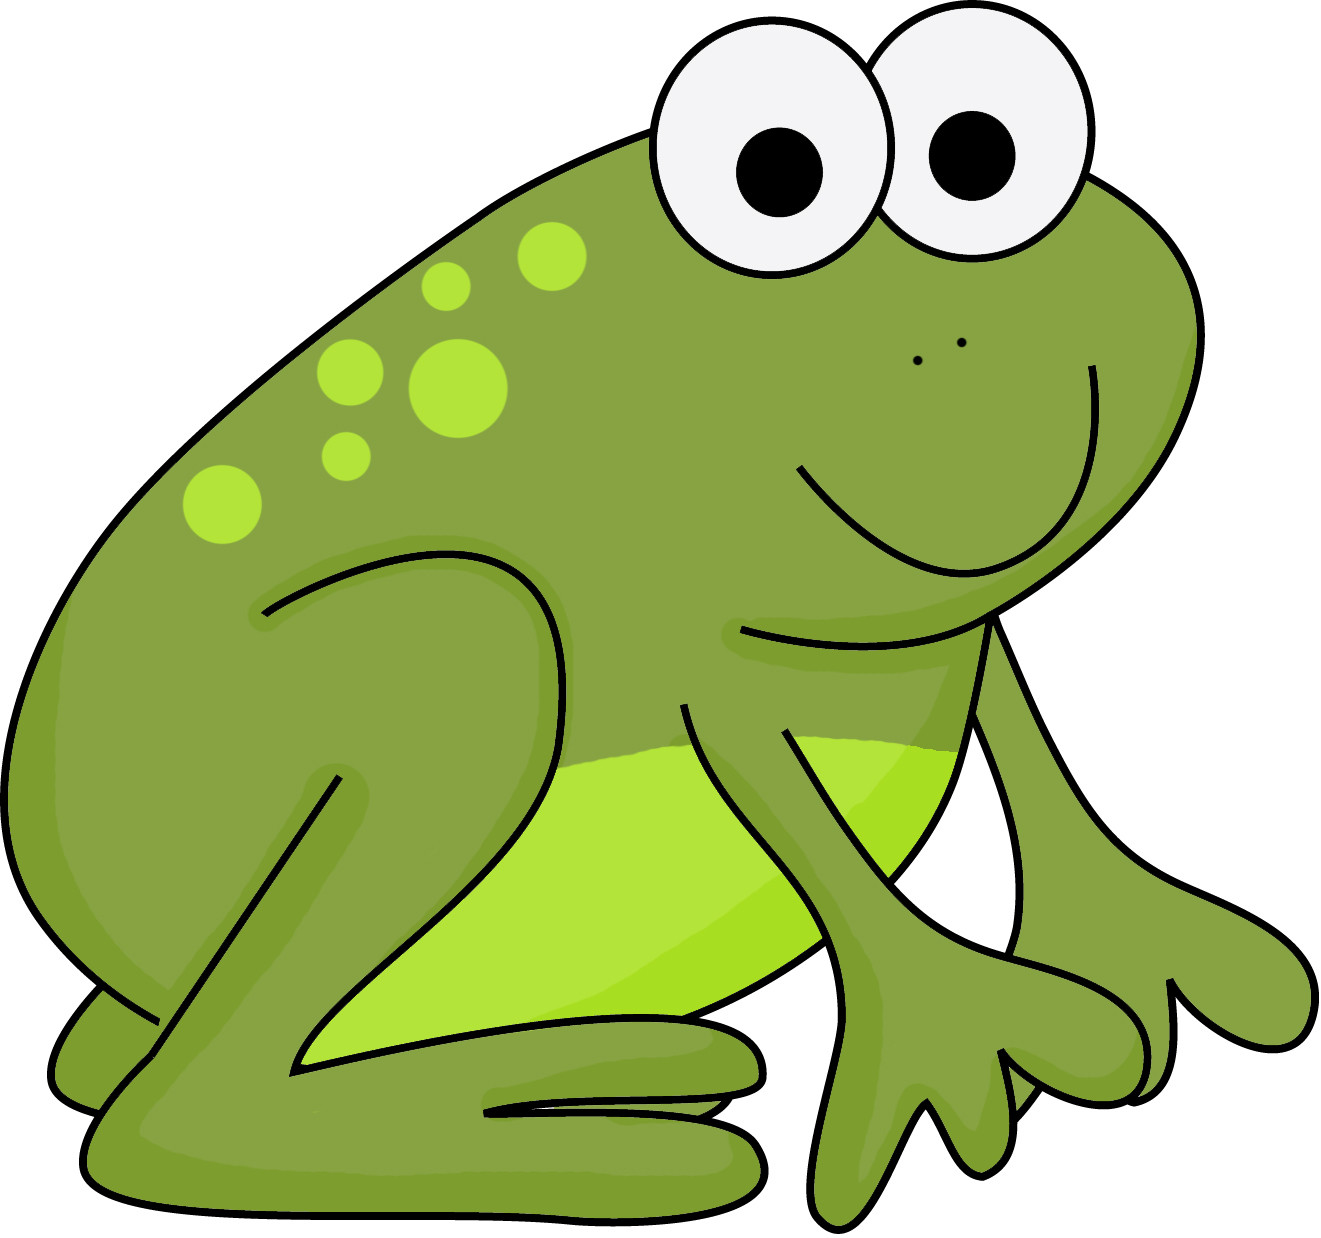 Frog Art For Toddlers
 Free Frogs For Kids Download Free Clip Art